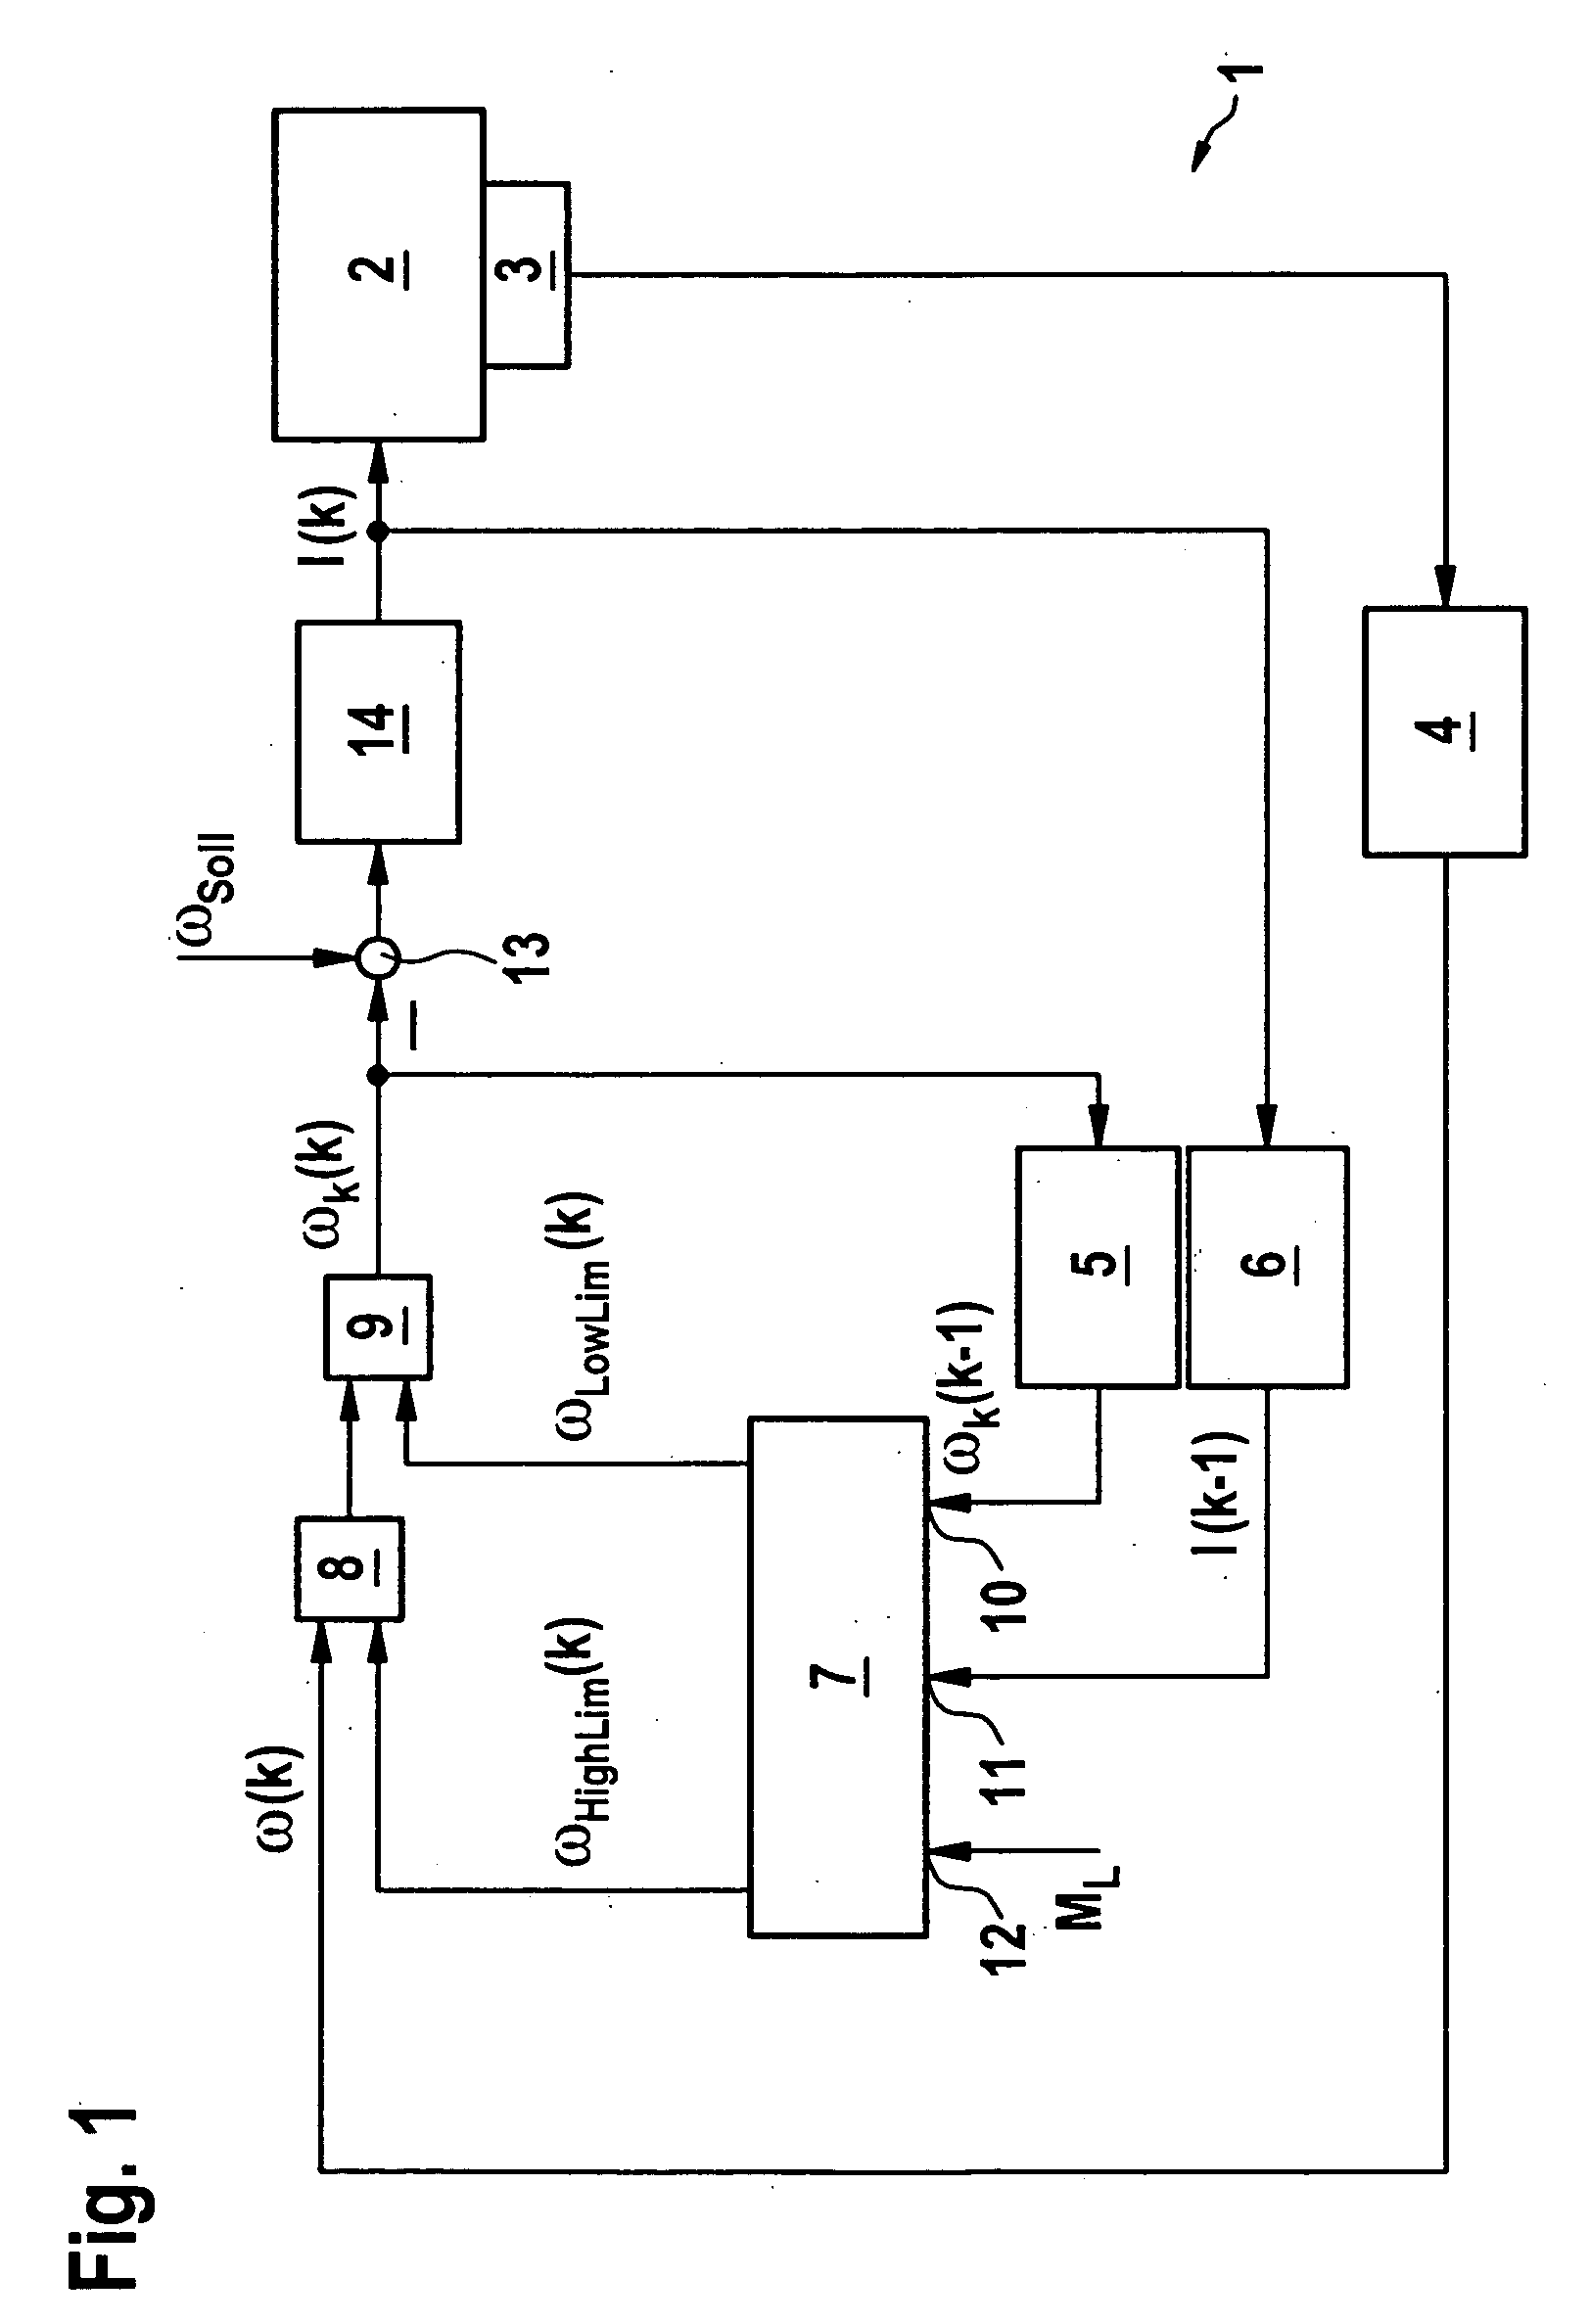 Method for measuring the speed of an electrical machine